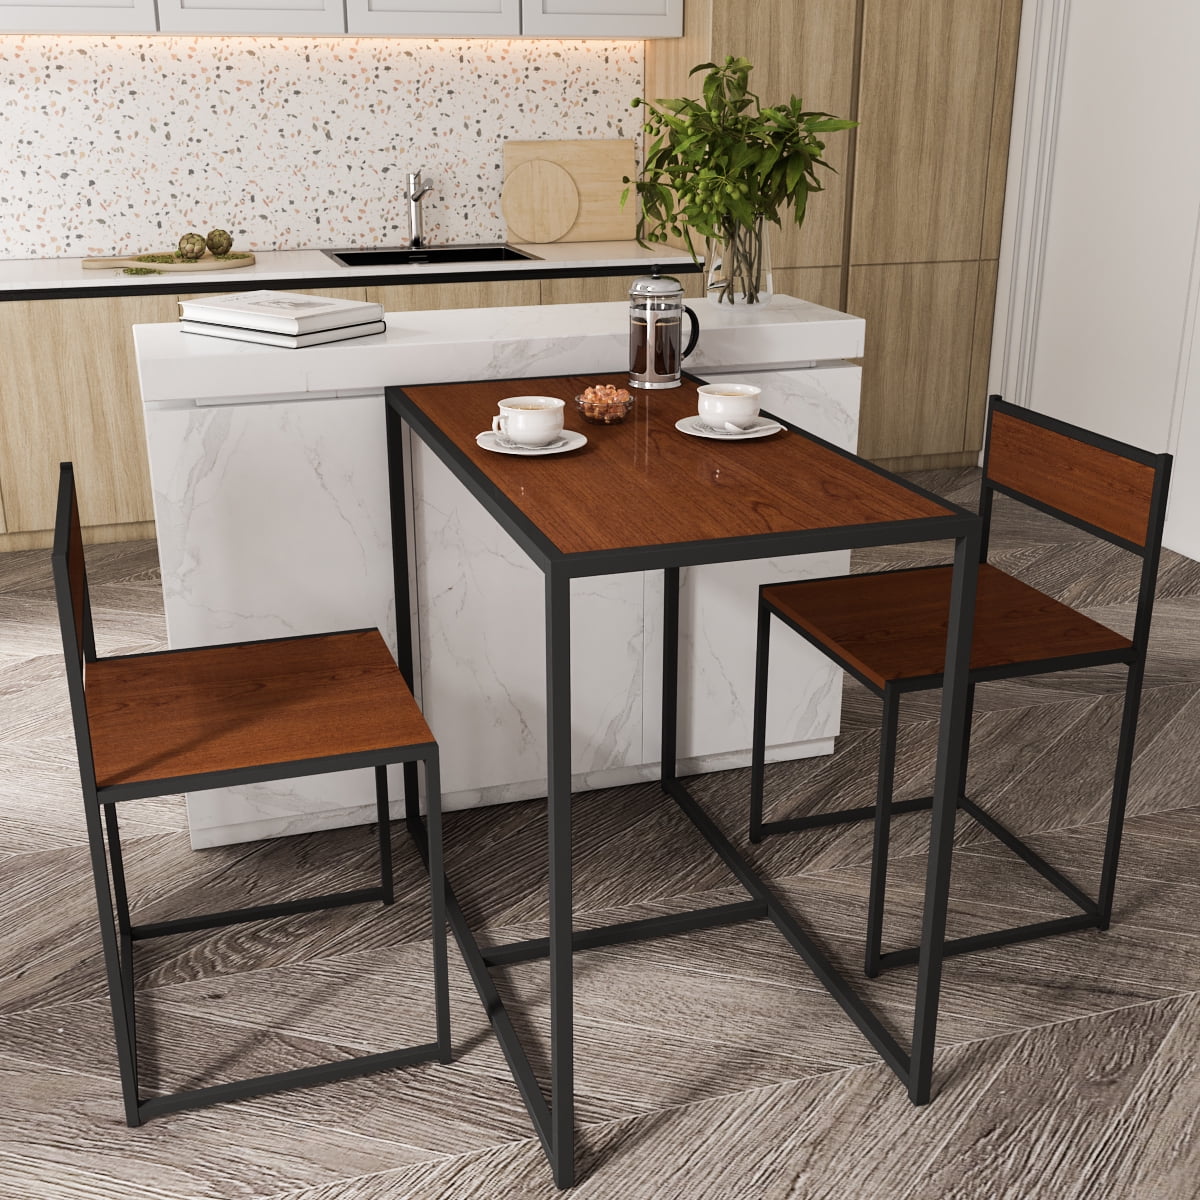 Bistro Table Set 3 Piece Dining For 2 Furniture Chair Kitchen Small Space Indoor 